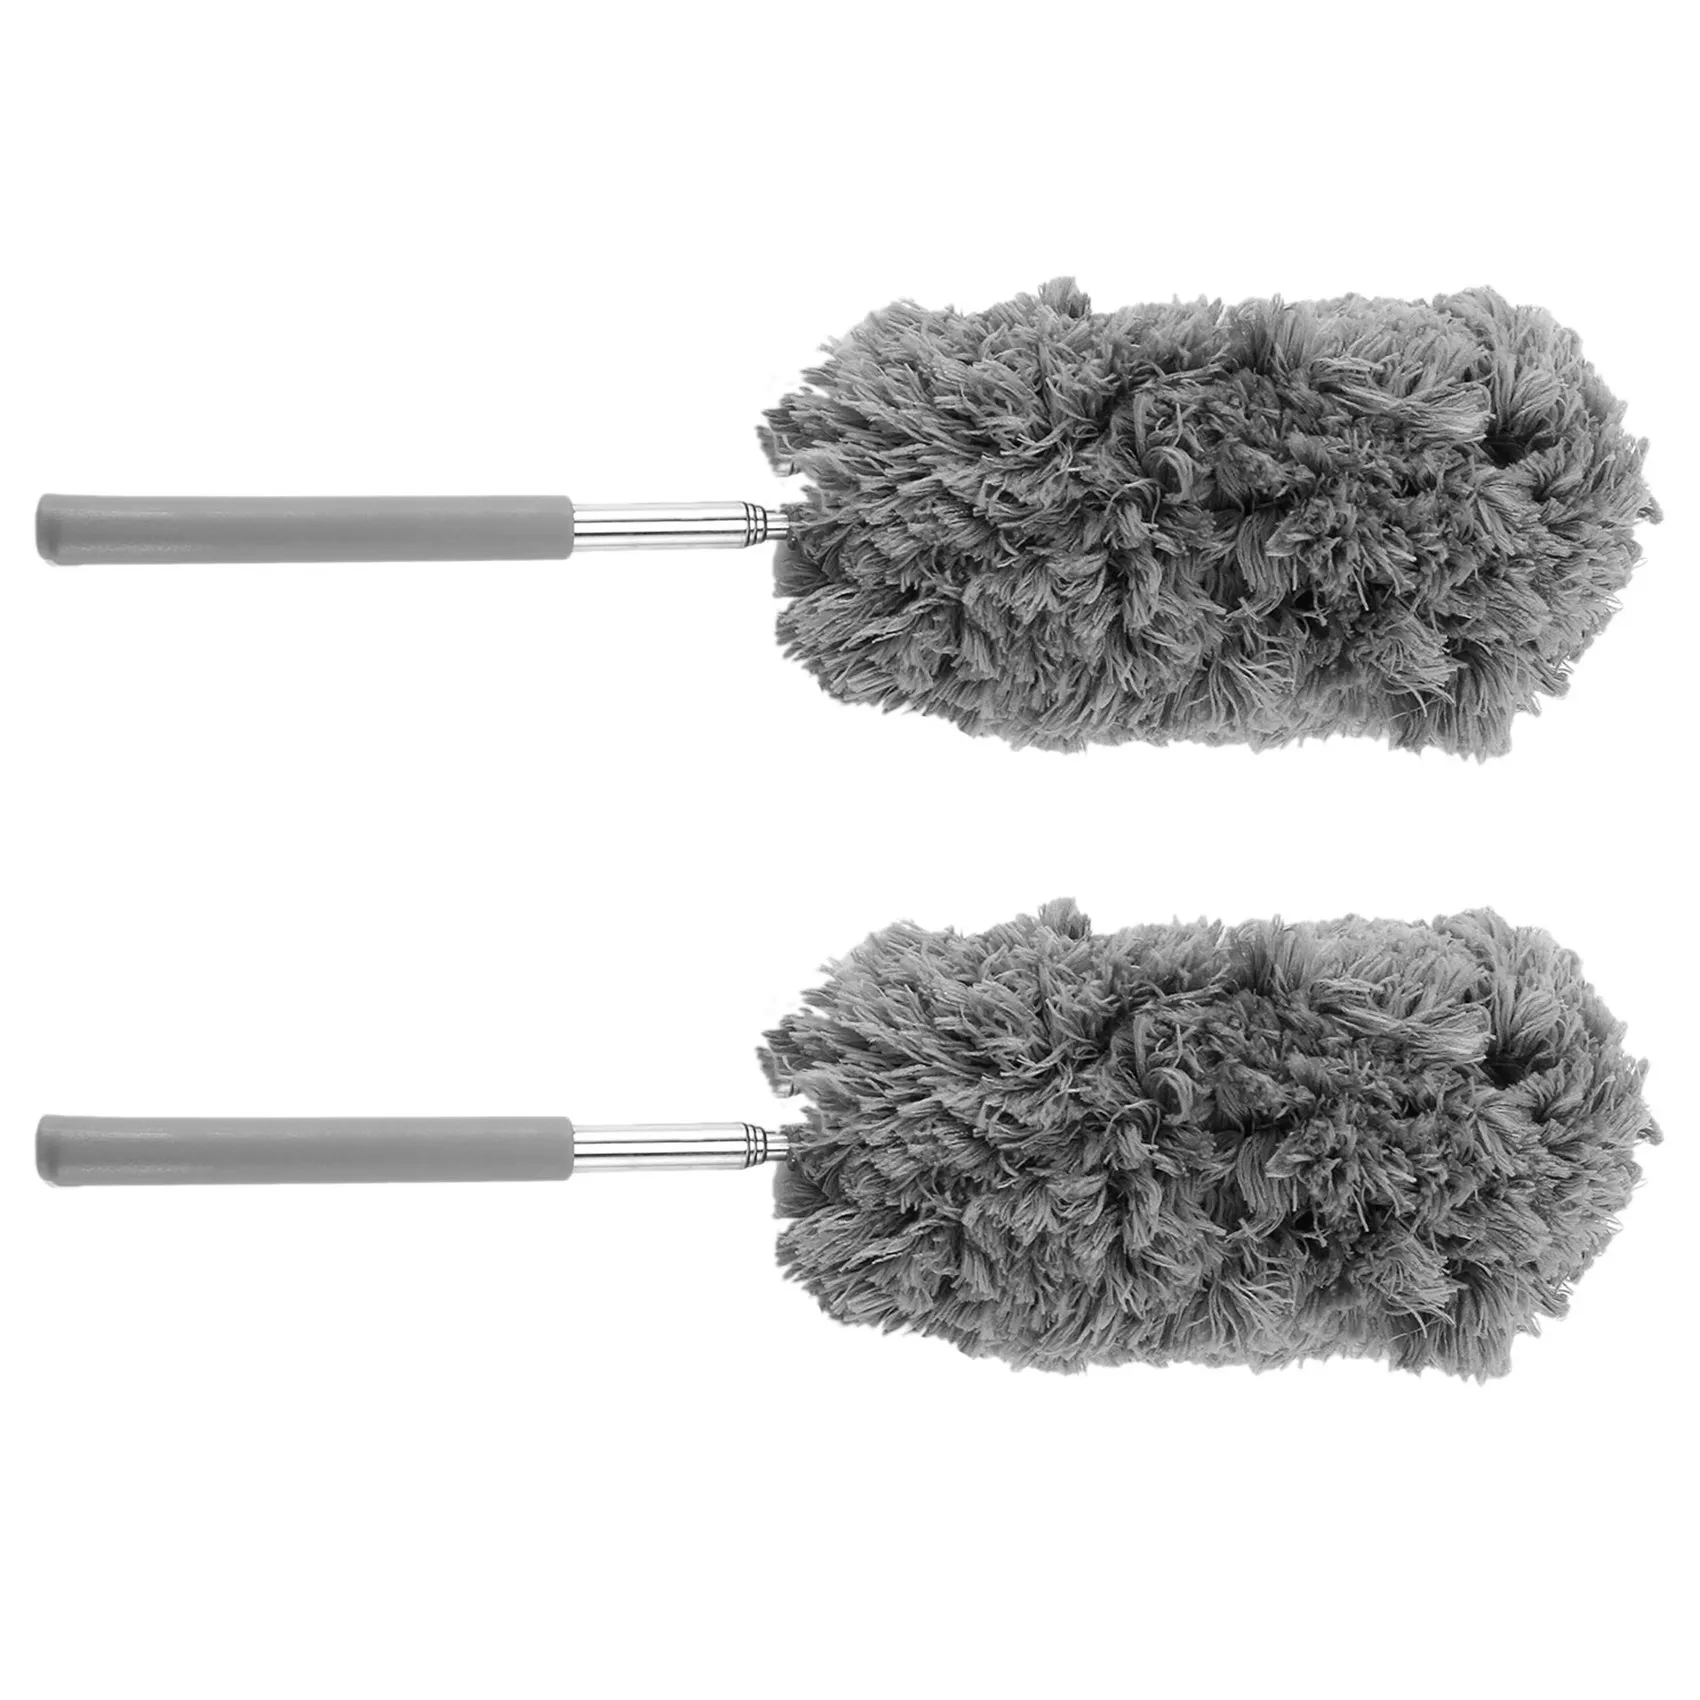 

2X Microfiber Dusting Retractable Household Cleaner Feather Duster Car Sweeper From the Dust Brush